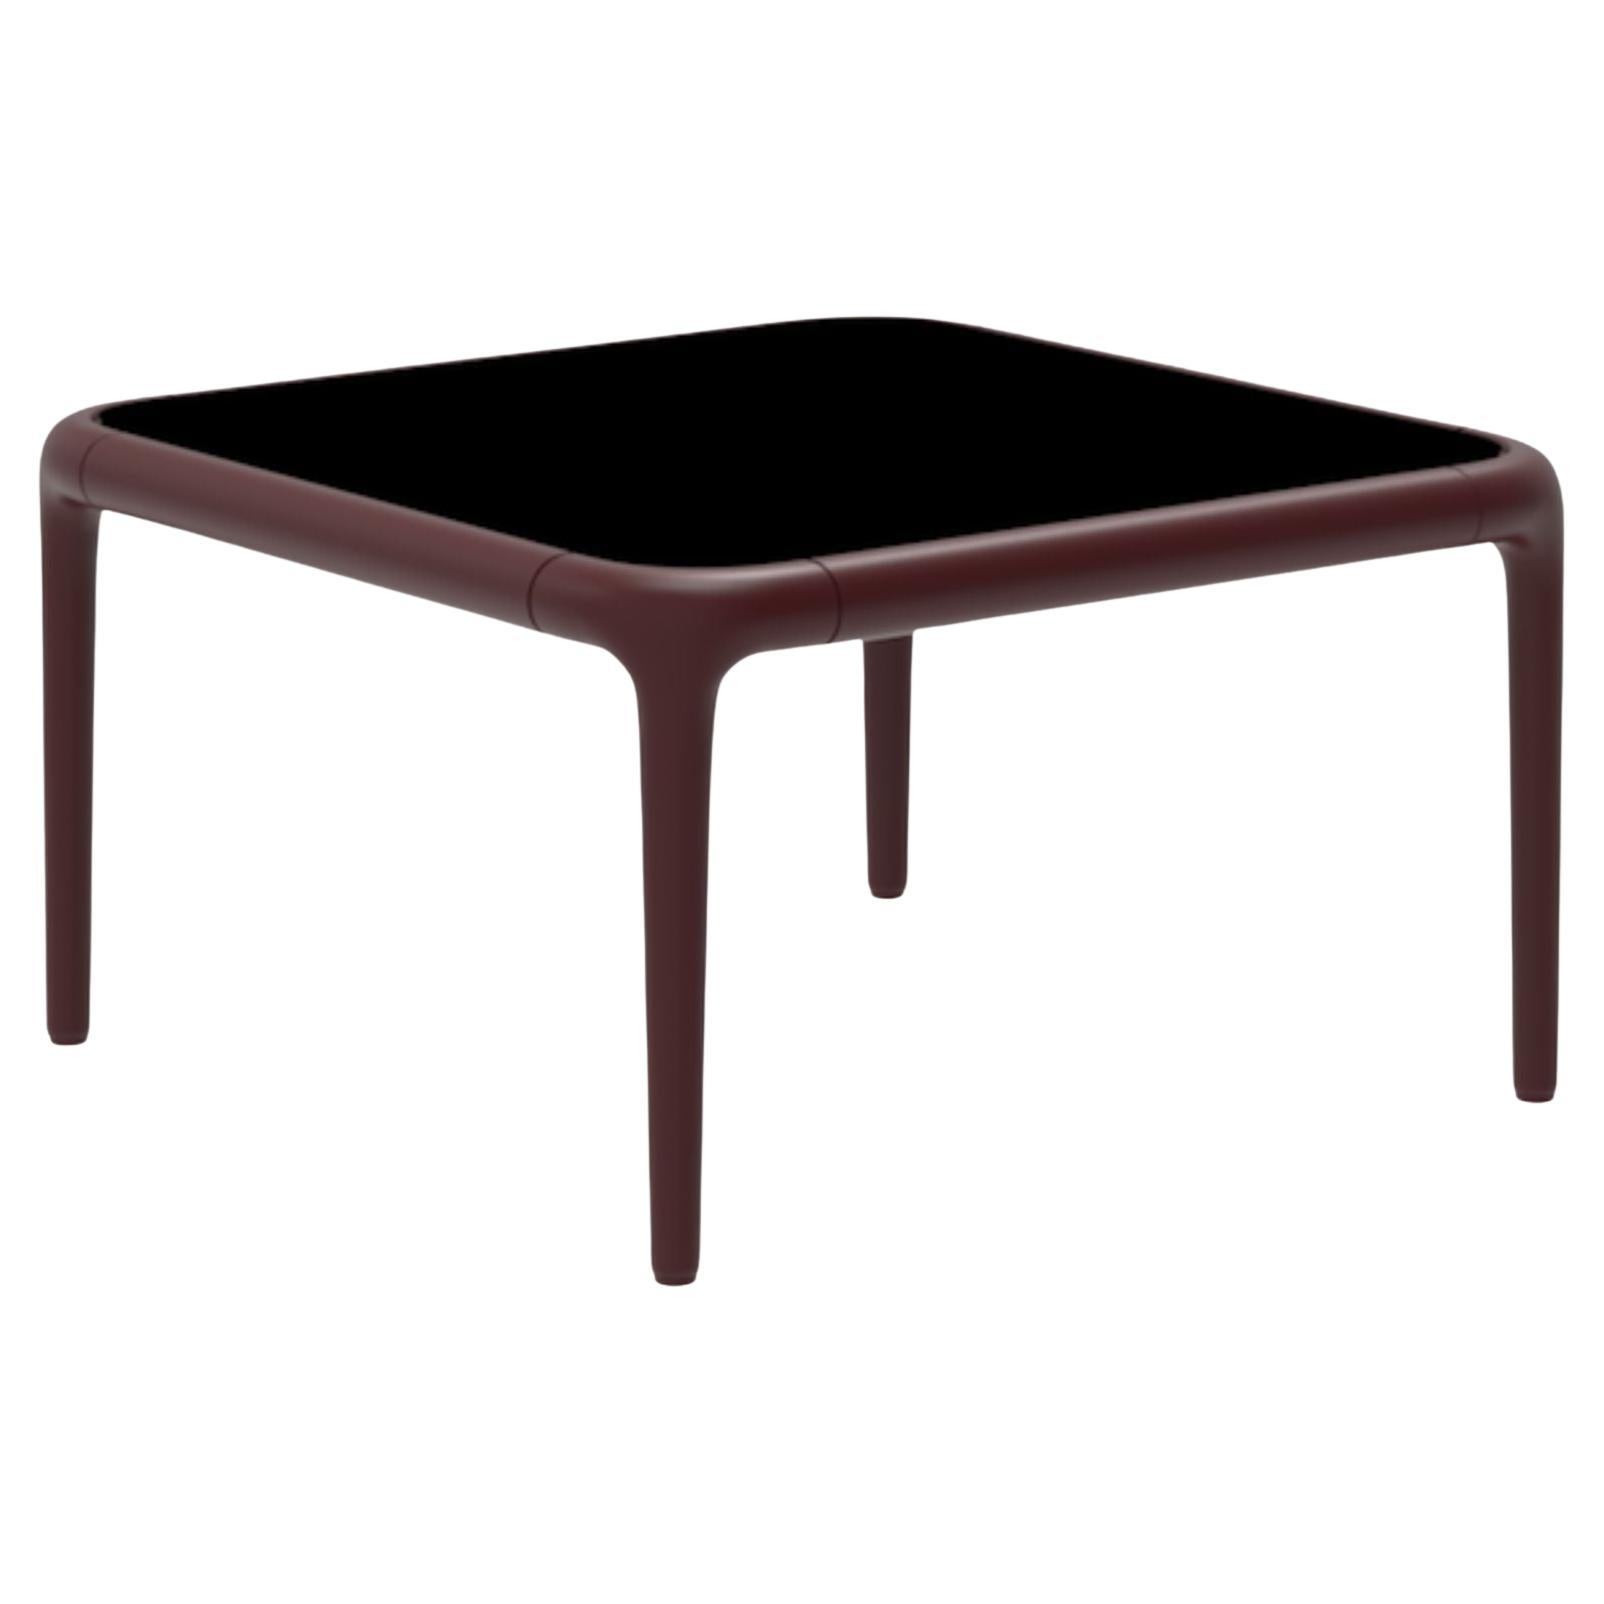 Xaloc Burgundy Coffee Table 50 with Glass Top by Mowee